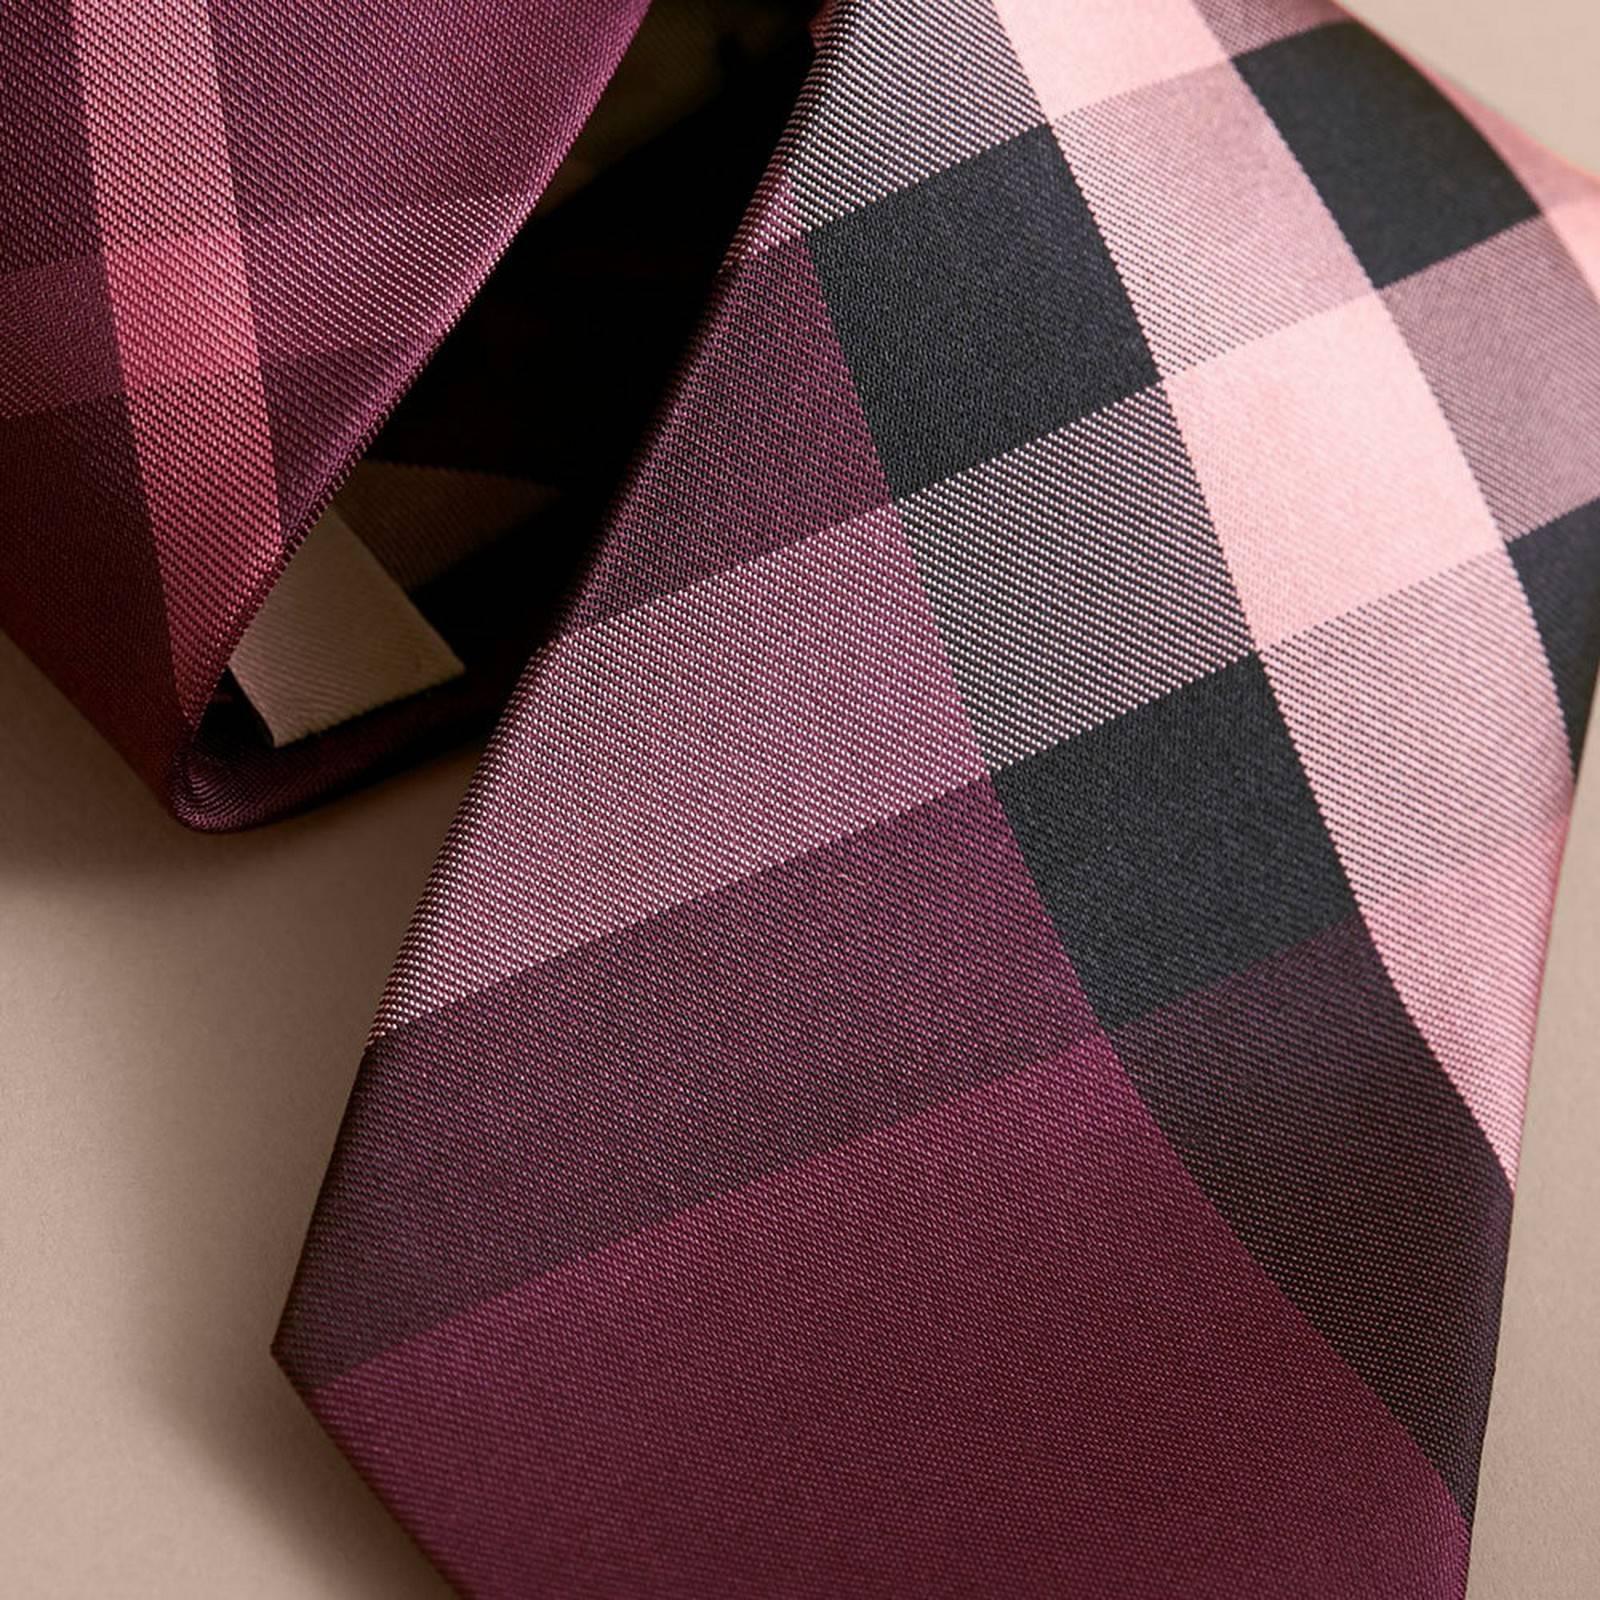 Burberry Modern Cut Check Silk Rose Pink Tie - Size: 3” (8cm)
Brand new.
100% Silk.
Size: 3” (8cm)
Made in Italy.